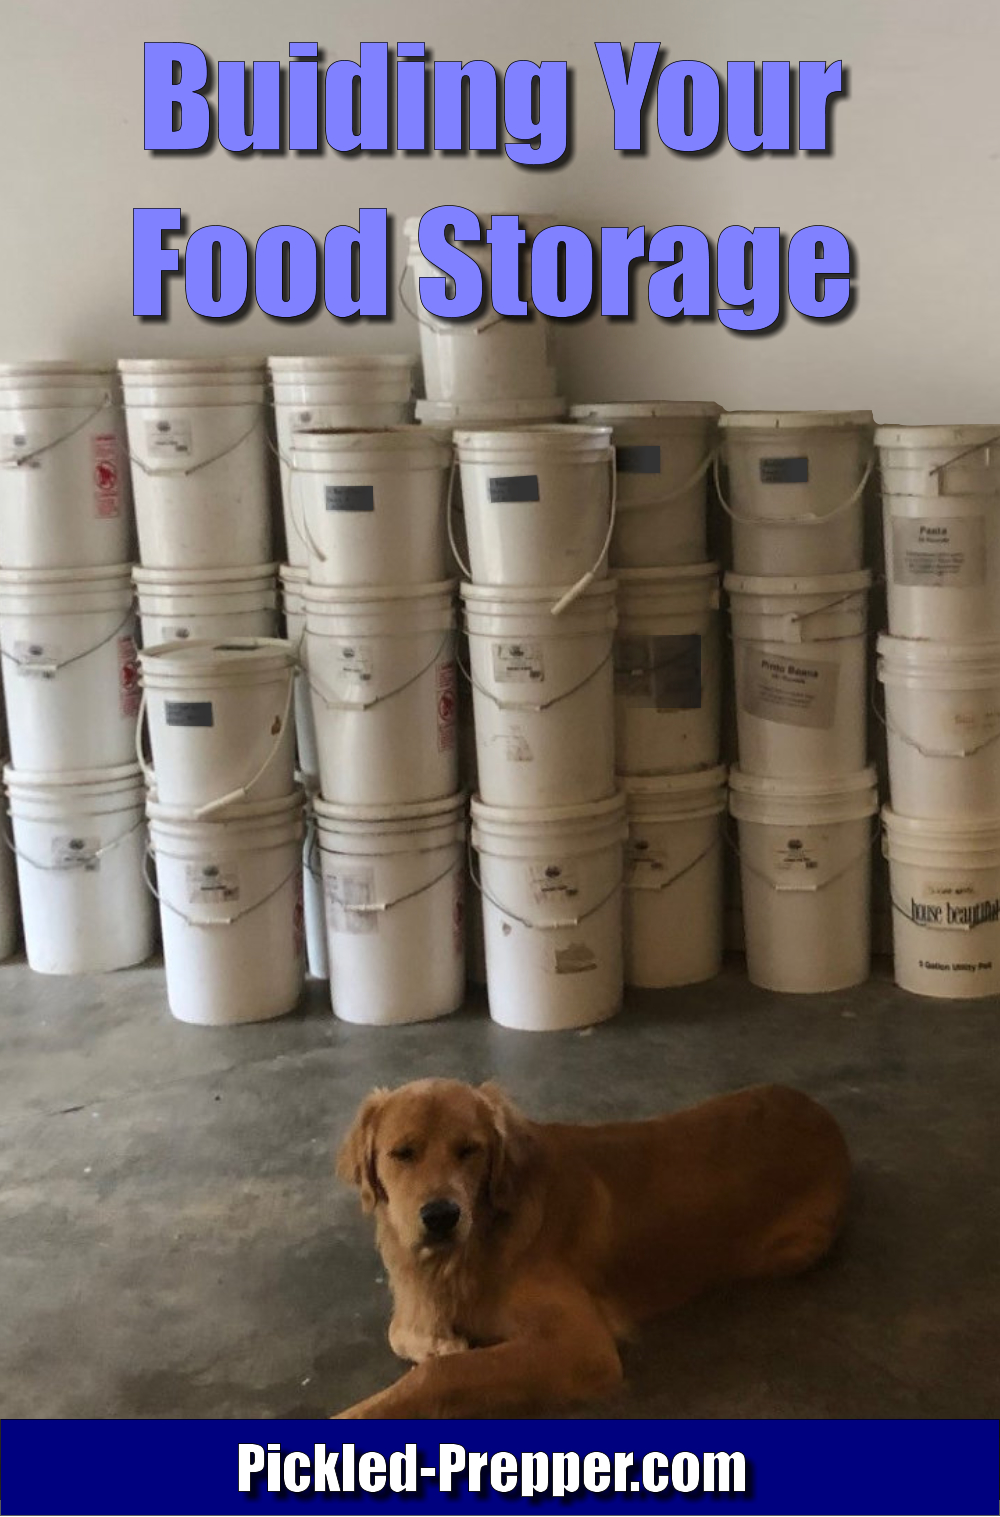 Prepper Diary October 2: How to Build Your Food Storage Over Time